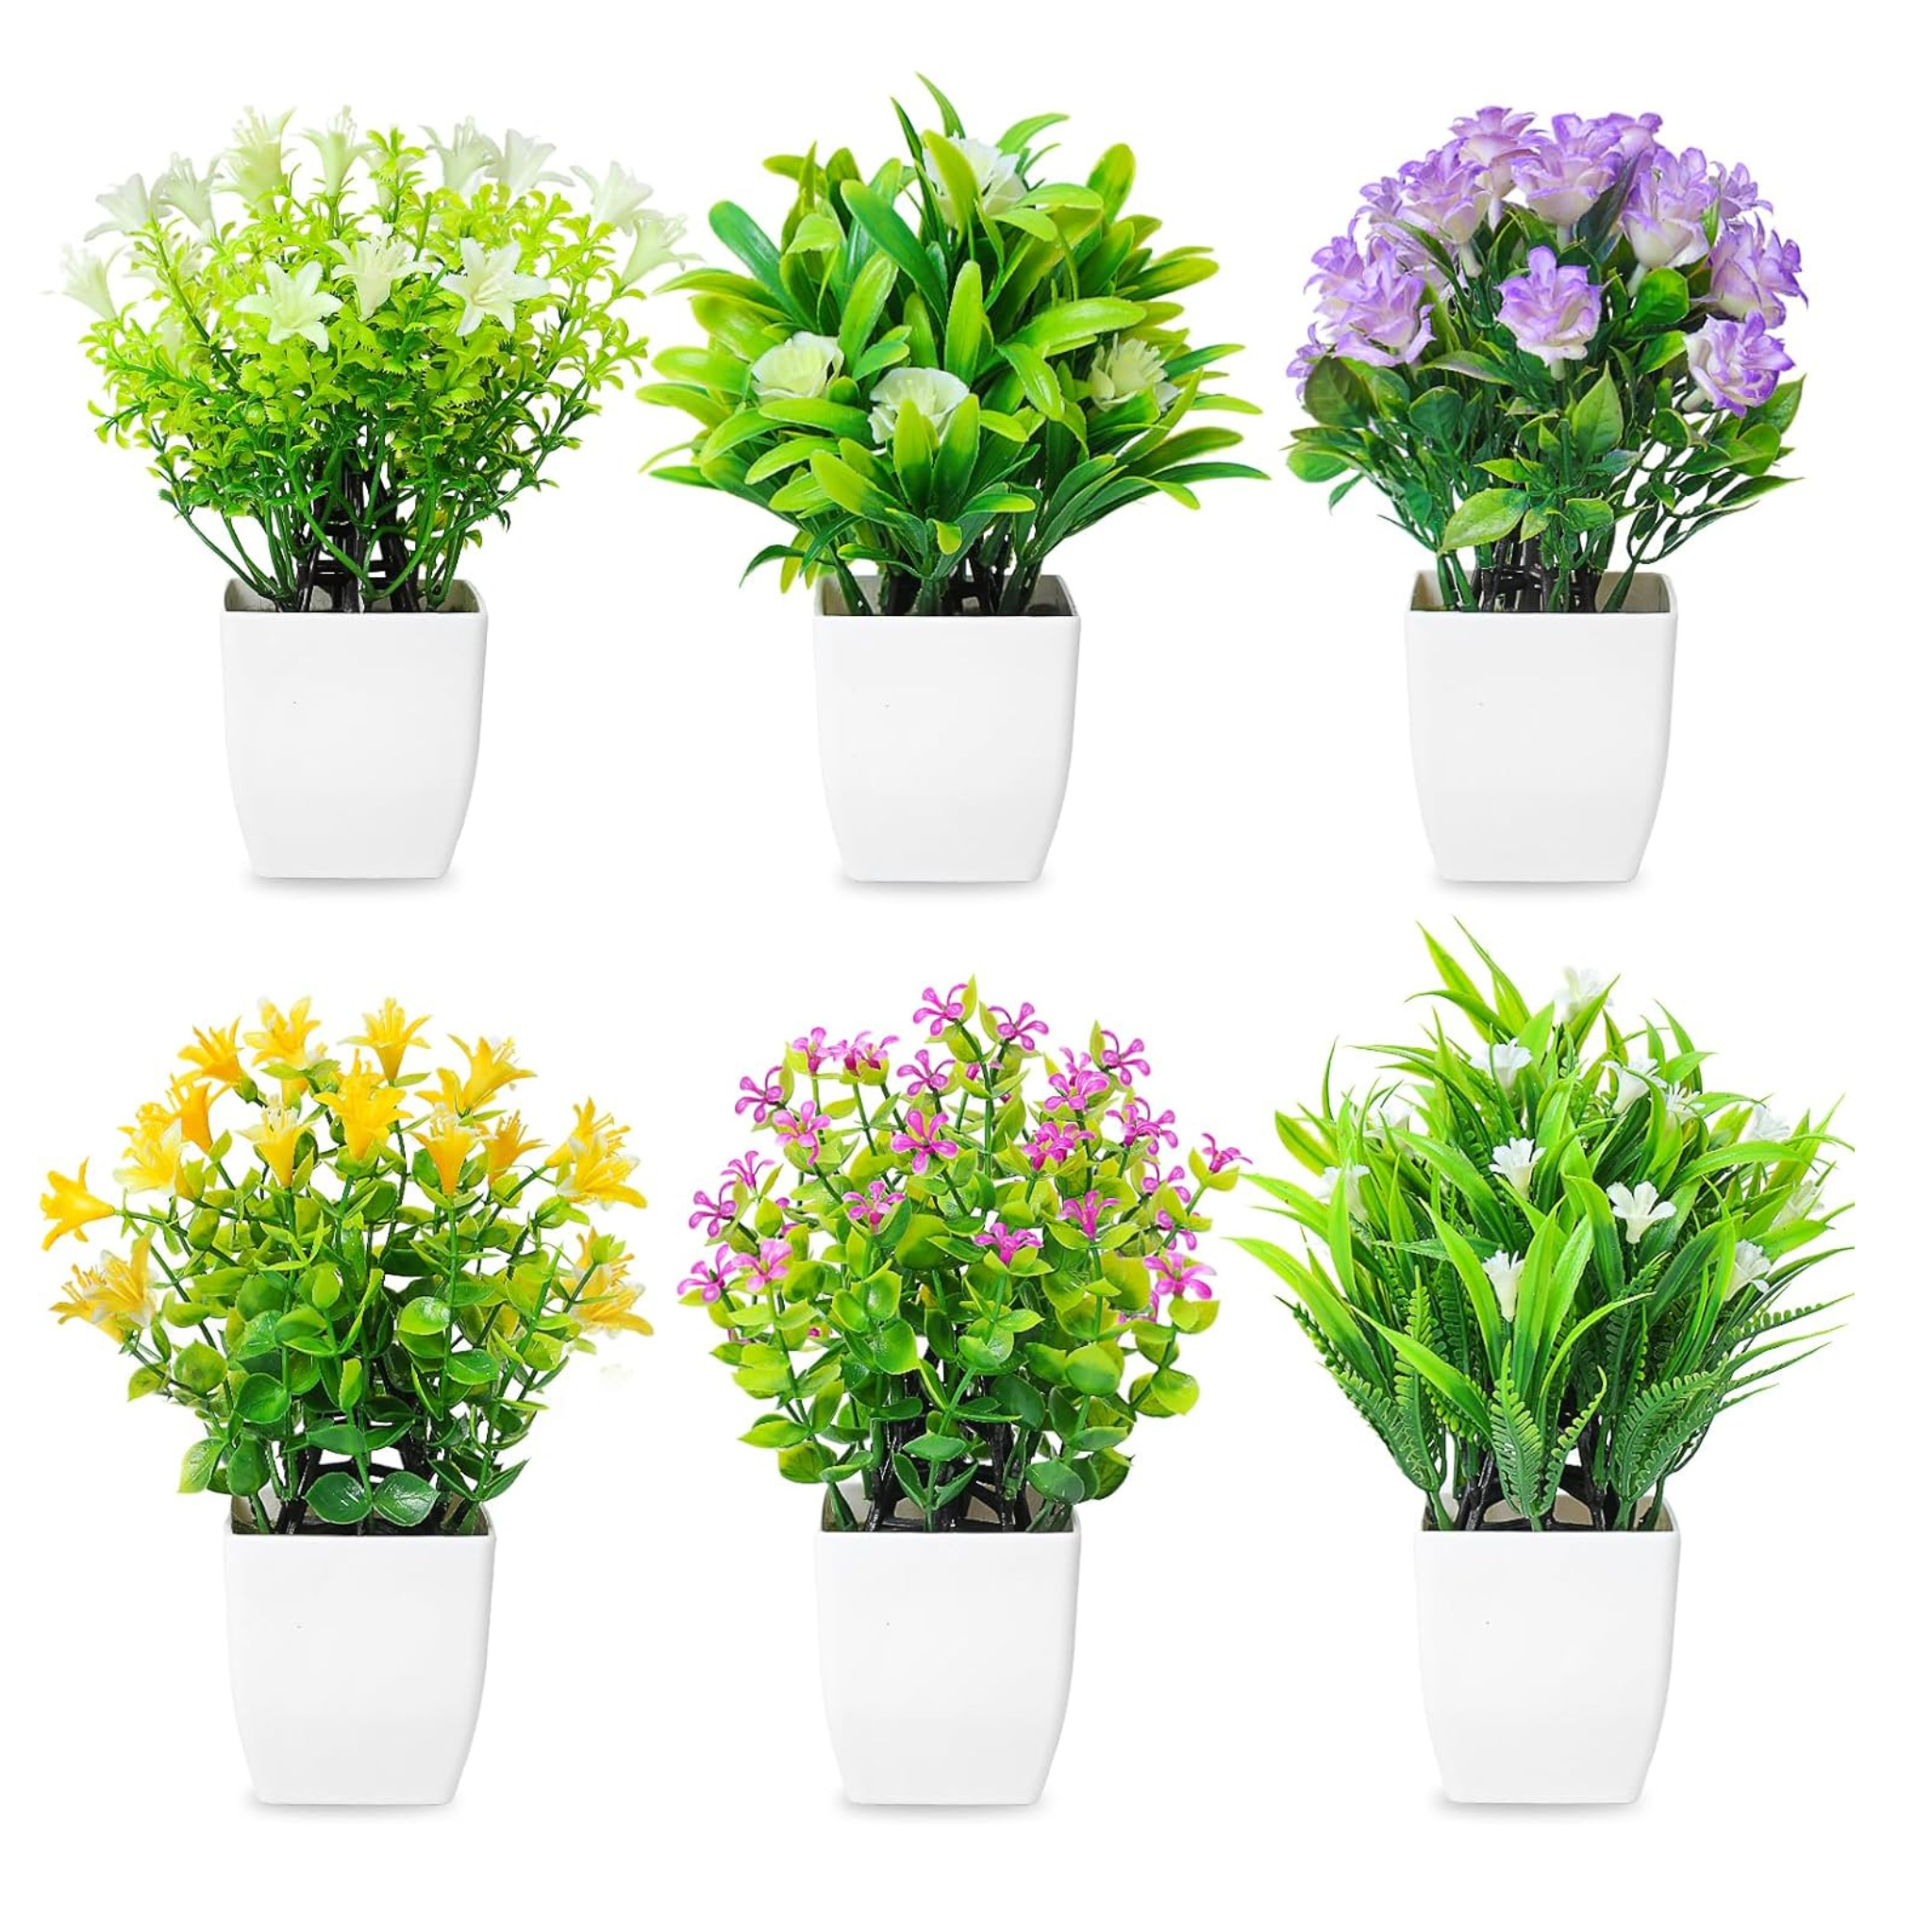 6 Pack Small Fake Flower Plants in Pots